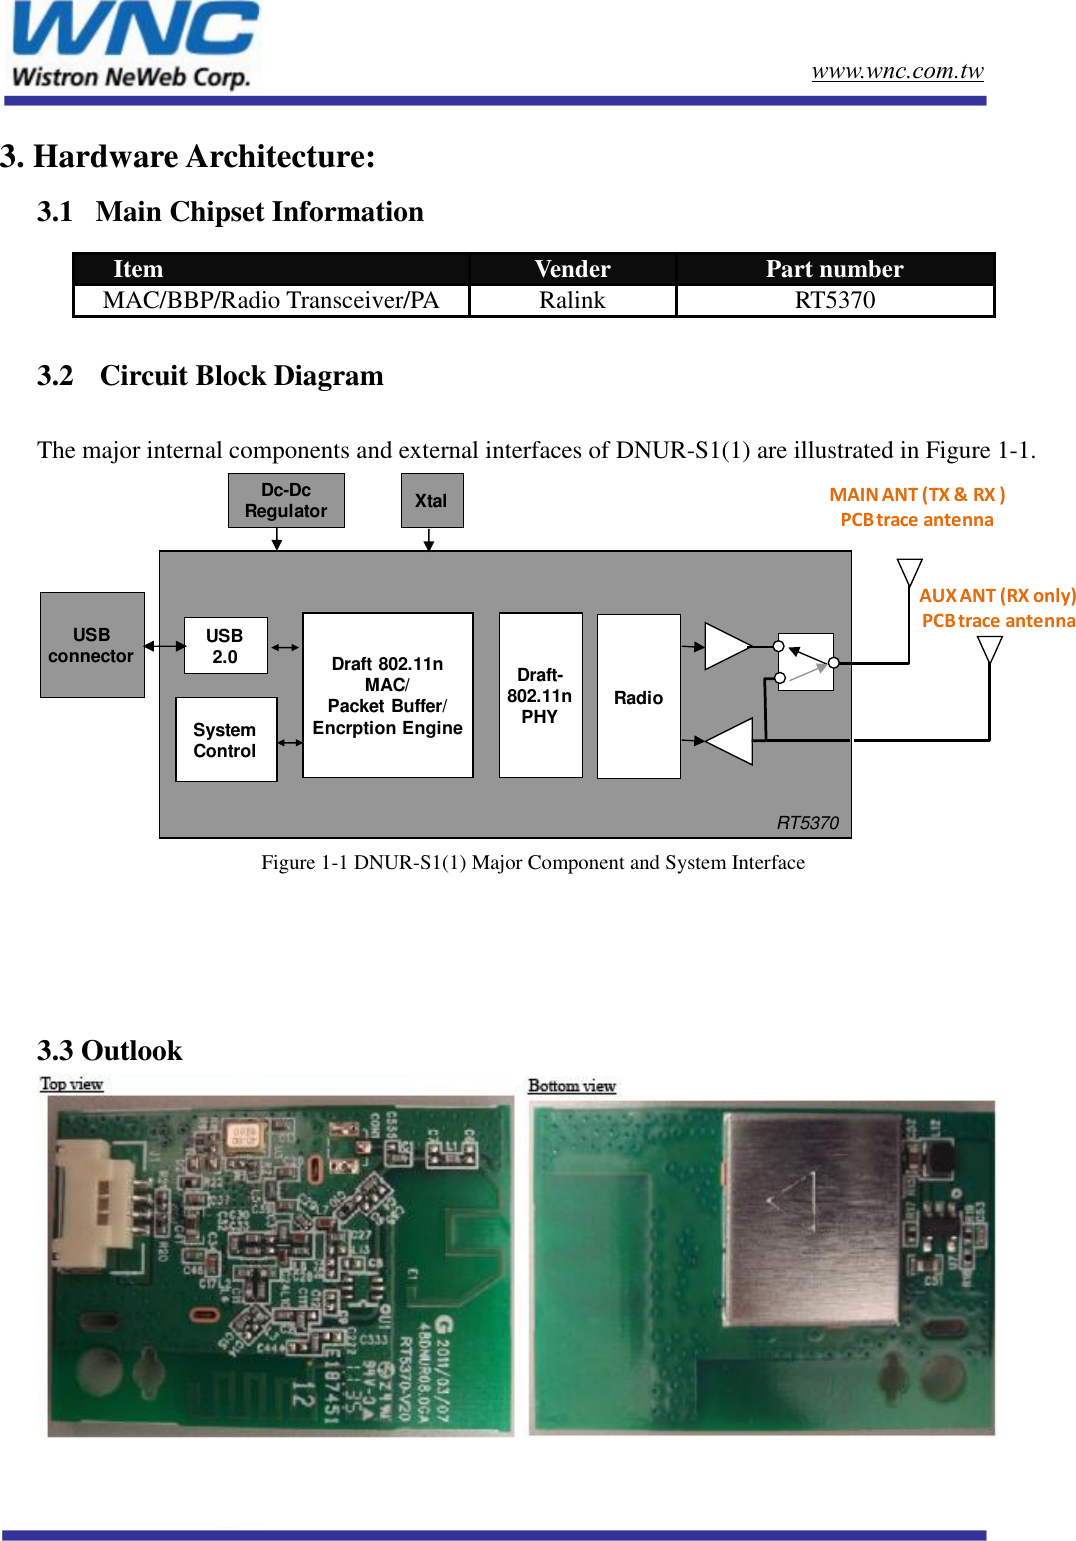           www.wnc.com.tw www.wnc.com.tw 3. Hardware Architecture: 3.1   Main Chipset Information   3.2  Circuit Block Diagram  The major internal components and external interfaces of DNUR-S1(1) are illustrated in Figure 1-1. USB 2.0System ControlDraft 802.11n MAC/Packet Buffer/ Encrption EngineDraft-802.11n PHYRadioRT5370XtalDc-Dc RegulatorUSB connectorMAIN ANT (TX &amp; RX )PCB trace antennaAUX ANT (RX only)PCB trace antenna Figure 1-1 DNUR-S1(1) Major Component and System Interface       3.3 Outlook  Item Vender Part number MAC/BBP/Radio Transceiver/PA Ralink RT5370 